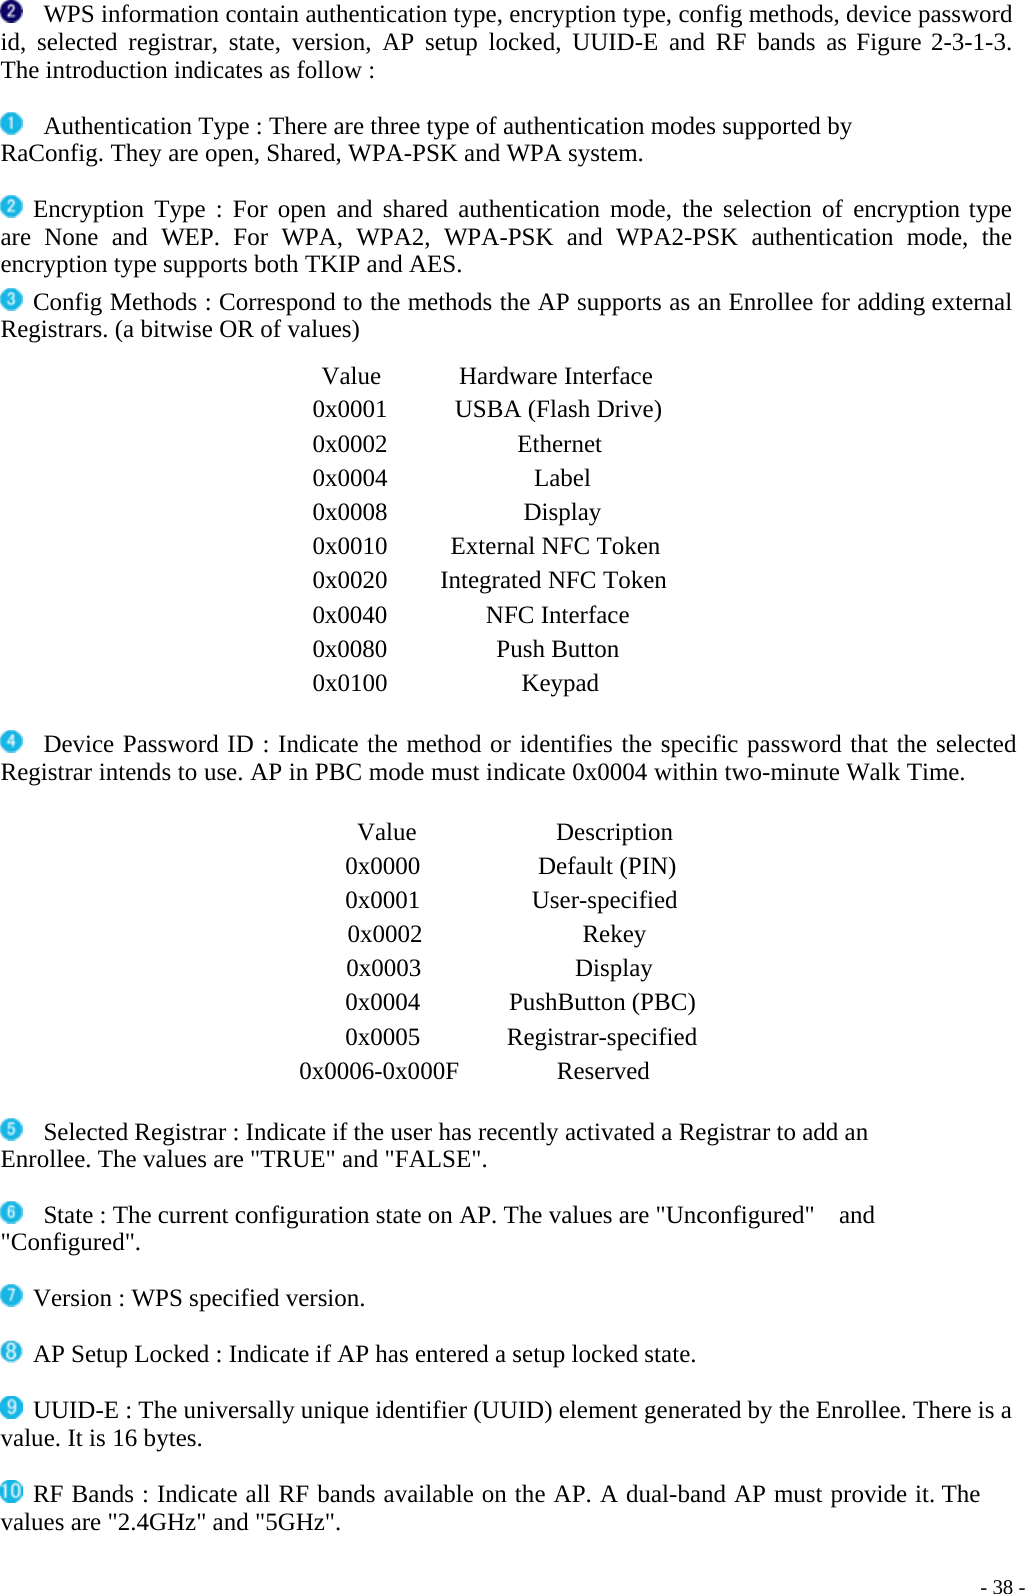    WPS information contain authentication type, encryption type, config methods, device password id, selected registrar, state, version, AP setup locked, UUID-E and RF bands as Figure 2-3-1-3. The introduction indicates as follow :    Authentication Type : There are three type of authentication modes supported by RaConfig. They are open, Shared, WPA-PSK and WPA system.   Encryption Type : For open and shared authentication mode, the selection of encryption type are None and WEP. For WPA, WPA2, WPA-PSK and WPA2-PSK authentication mode, the encryption type supports both TKIP and AES.  Config Methods : Correspond to the methods the AP supports as an Enrollee for adding external Registrars. (a bitwise OR of values)  Value Hardware Interface 0x0001 USBA (Flash Drive) 0x0002 Ethernet 0x0004 Label 0x0008 Display 0x0010  External NFC Token 0x0020  Integrated NFC Token 0x0040 NFC Interface 0x0080 Push Button 0x0100 Keypad     Device Password ID : Indicate the method or identifies the specific password that the selected Registrar intends to use. AP in PBC mode must indicate 0x0004 within two-minute Walk Time.   Value Description 0x0000 Default (PIN) 0x0001 User-specified 0x0002 Rekey 0x0003 Display 0x0004 PushButton (PBC) 0x0005 Registrar-specified 0x0006-0x000F Reserved     Selected Registrar : Indicate if the user has recently activated a Registrar to add an Enrollee. The values are &quot;TRUE&quot; and &quot;FALSE&quot;.    State : The current configuration state on AP. The values are &quot;Unconfigured&quot;    and &quot;Configured&quot;.   Version : WPS specified version.   AP Setup Locked : Indicate if AP has entered a setup locked state.   UUID-E : The universally unique identifier (UUID) element generated by the Enrollee. There is a value. It is 16 bytes.   RF Bands : Indicate all RF bands available on the AP. A dual-band AP must provide it. The values are &quot;2.4GHz&quot; and &quot;5GHz&quot;.    - 38 -